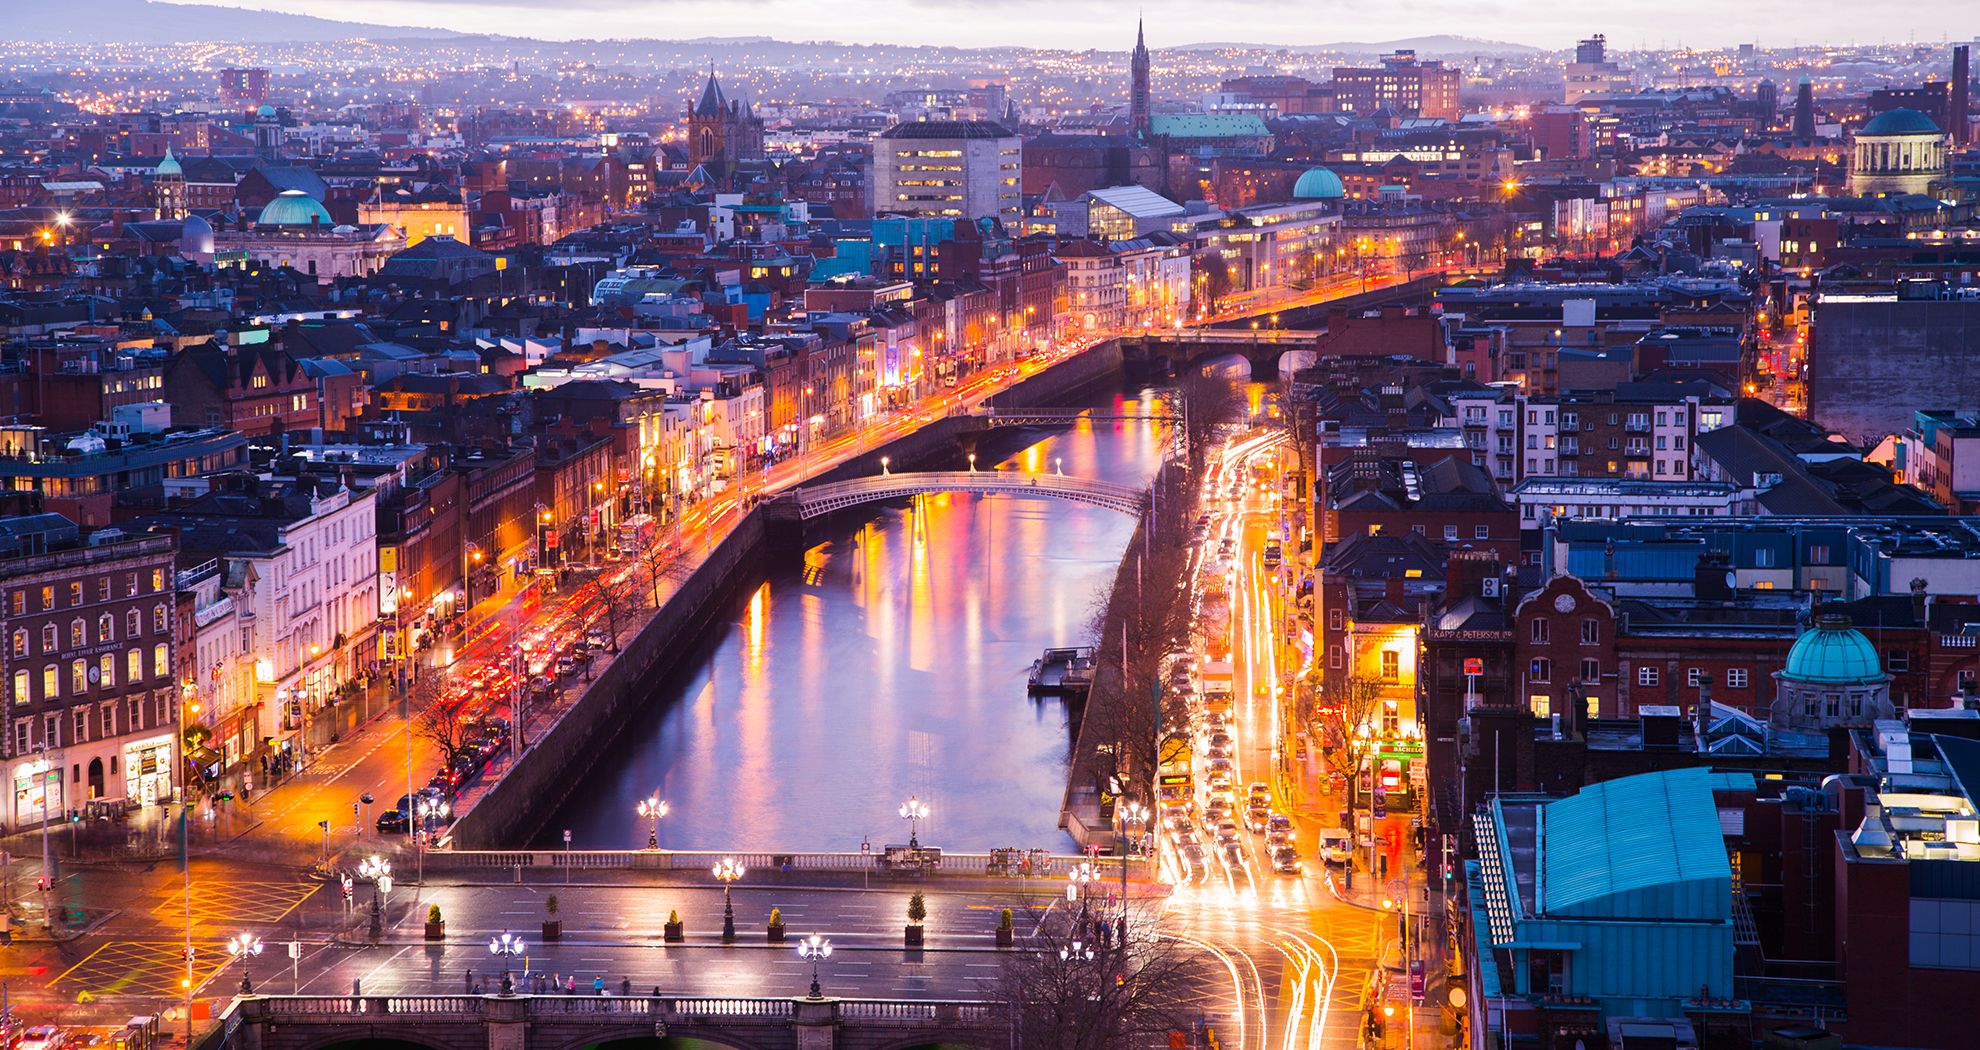 Overview of River Liffey and the Dublin City Centre at twilight